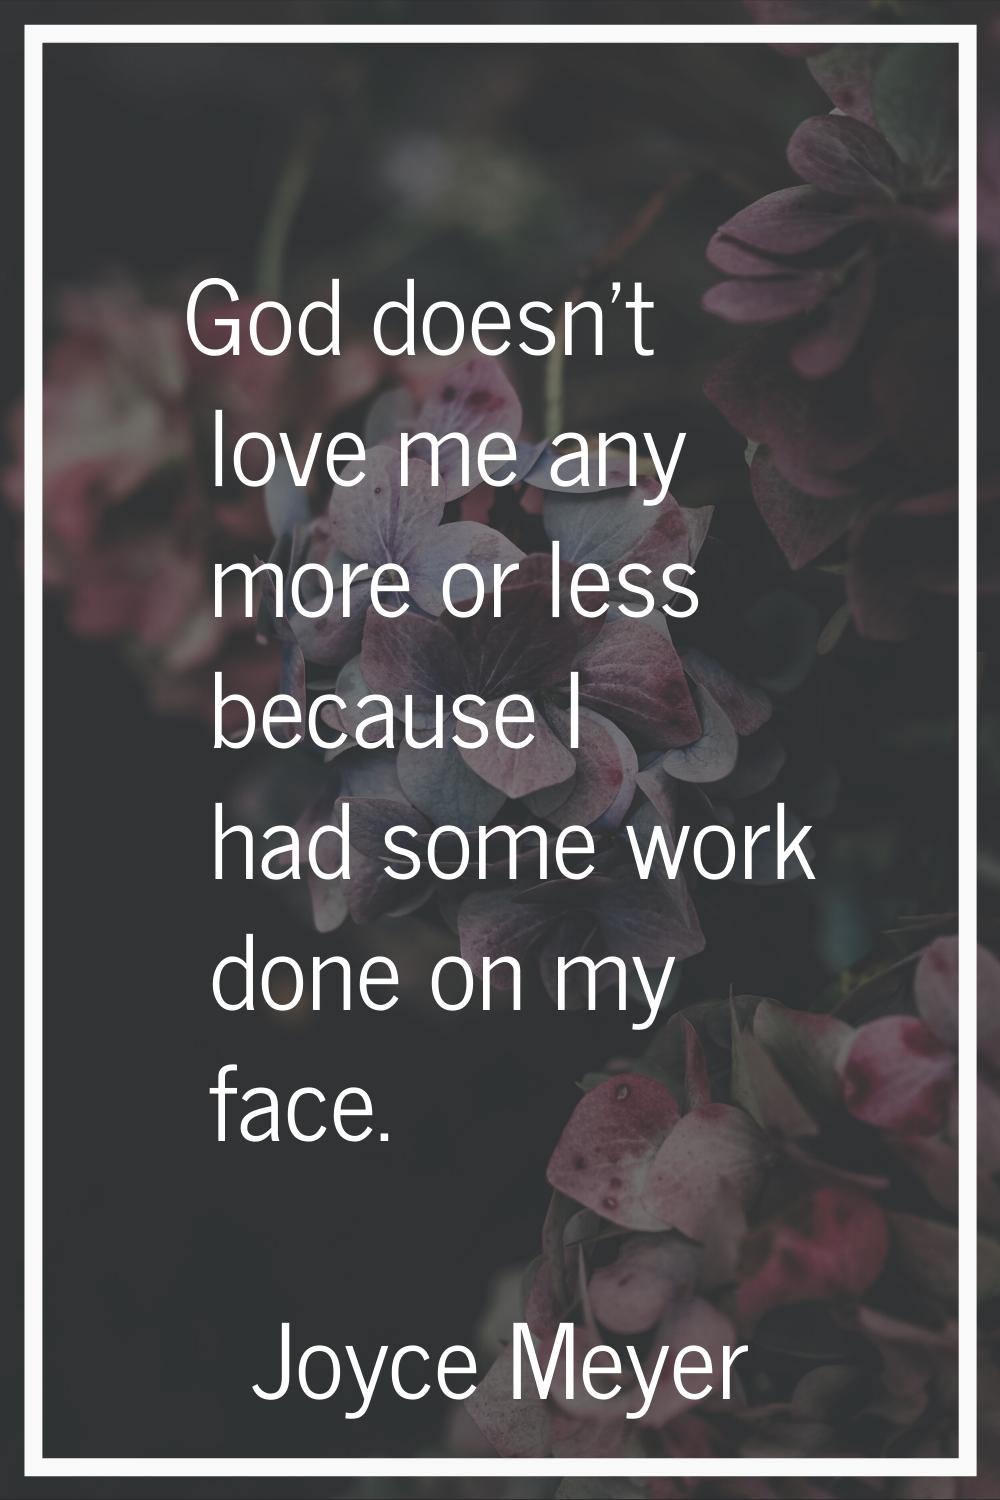 God doesn't love me any more or less because I had some work done on my face.